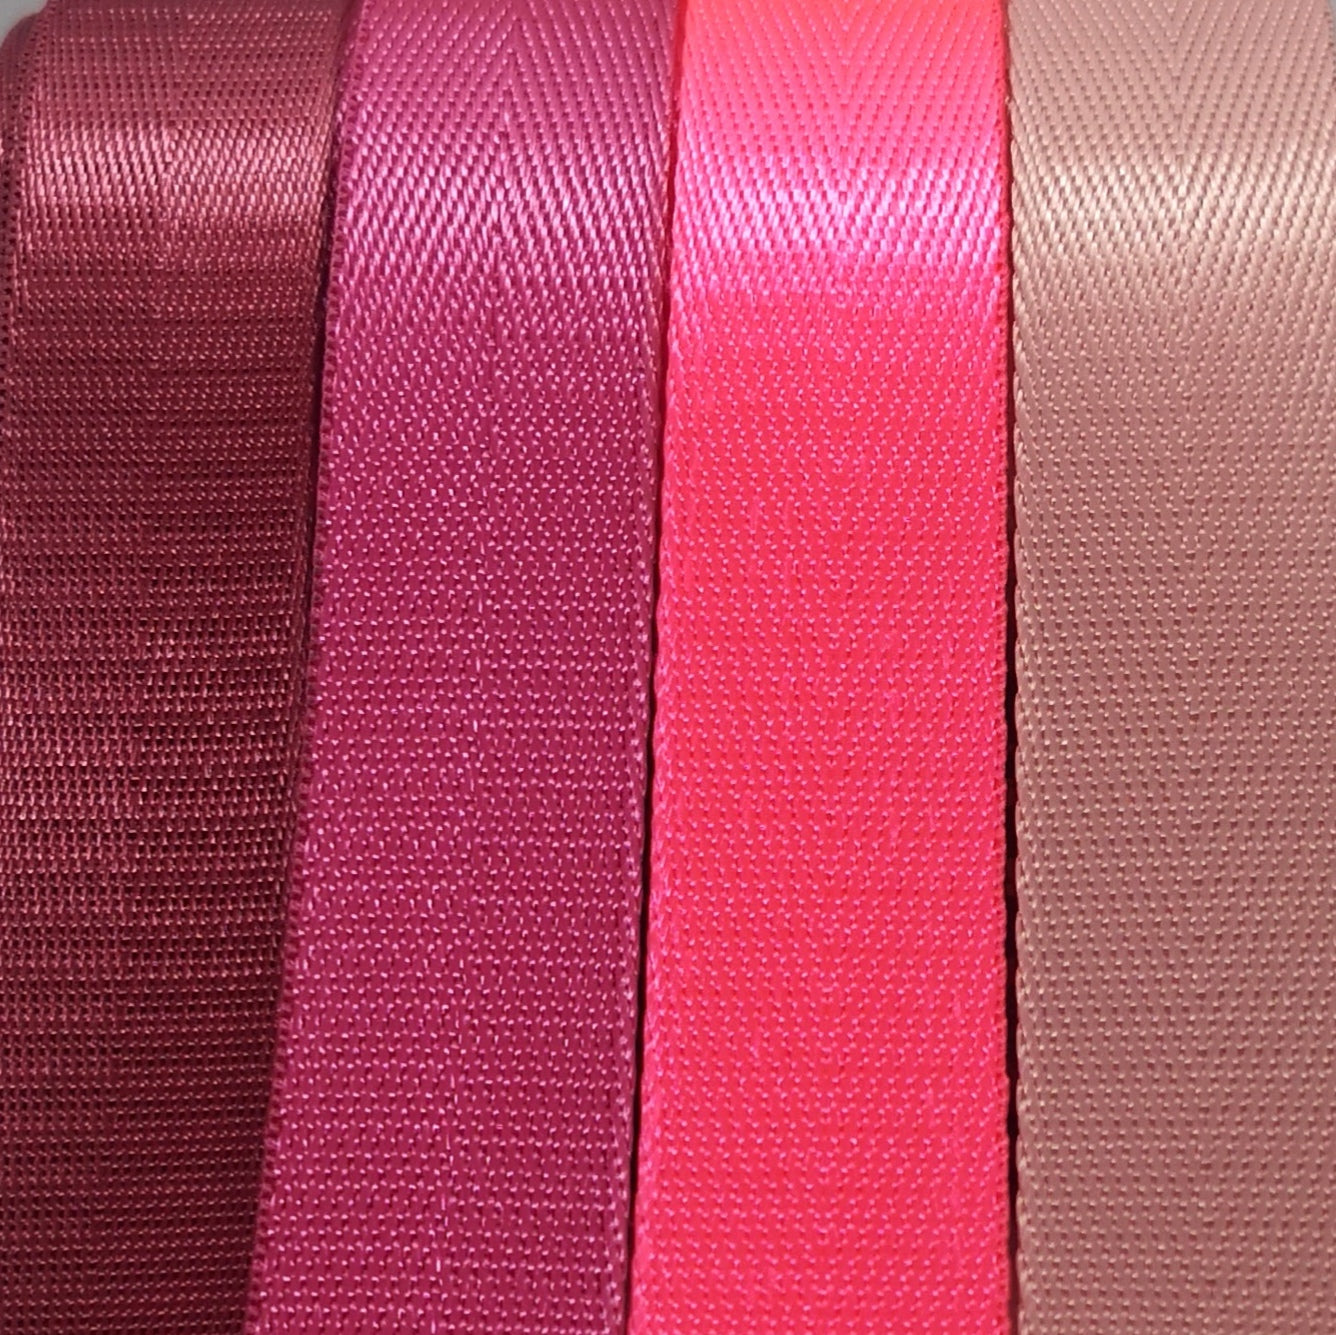 1" Wide Webbing - Solid Color - RASPBERRY PINK